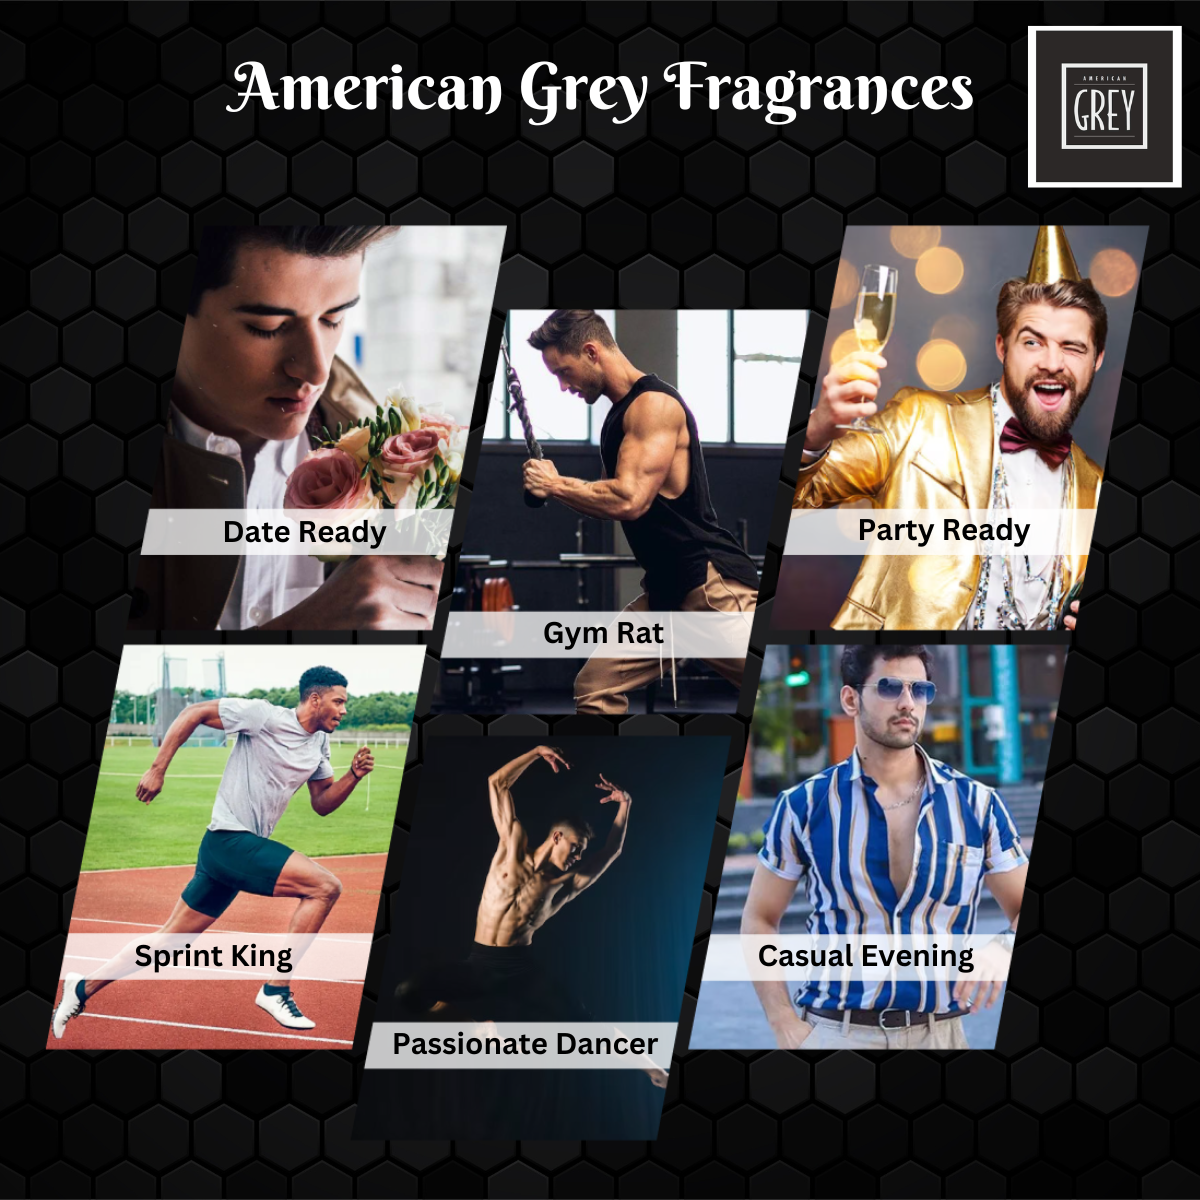 be date ready with american grey perfume spray, be party ready with american grey deo spray, grooming routine for men, best party deo, best gym deo, long lasting deo for casual evenings, can I use deodorant anytime, when can u wear a deodorant, can I wear a deo in morning, best time to apply deo, best time to apply american grey deo, american grey deo, top men deo brand in india, spicy smelling deo,  top rated mens deo, men grooming essential, men fragrance for winter season, best deo for cold weather, popular winter deodorant for men, best deo for winter season, best deo for winter season, casual day wear for men